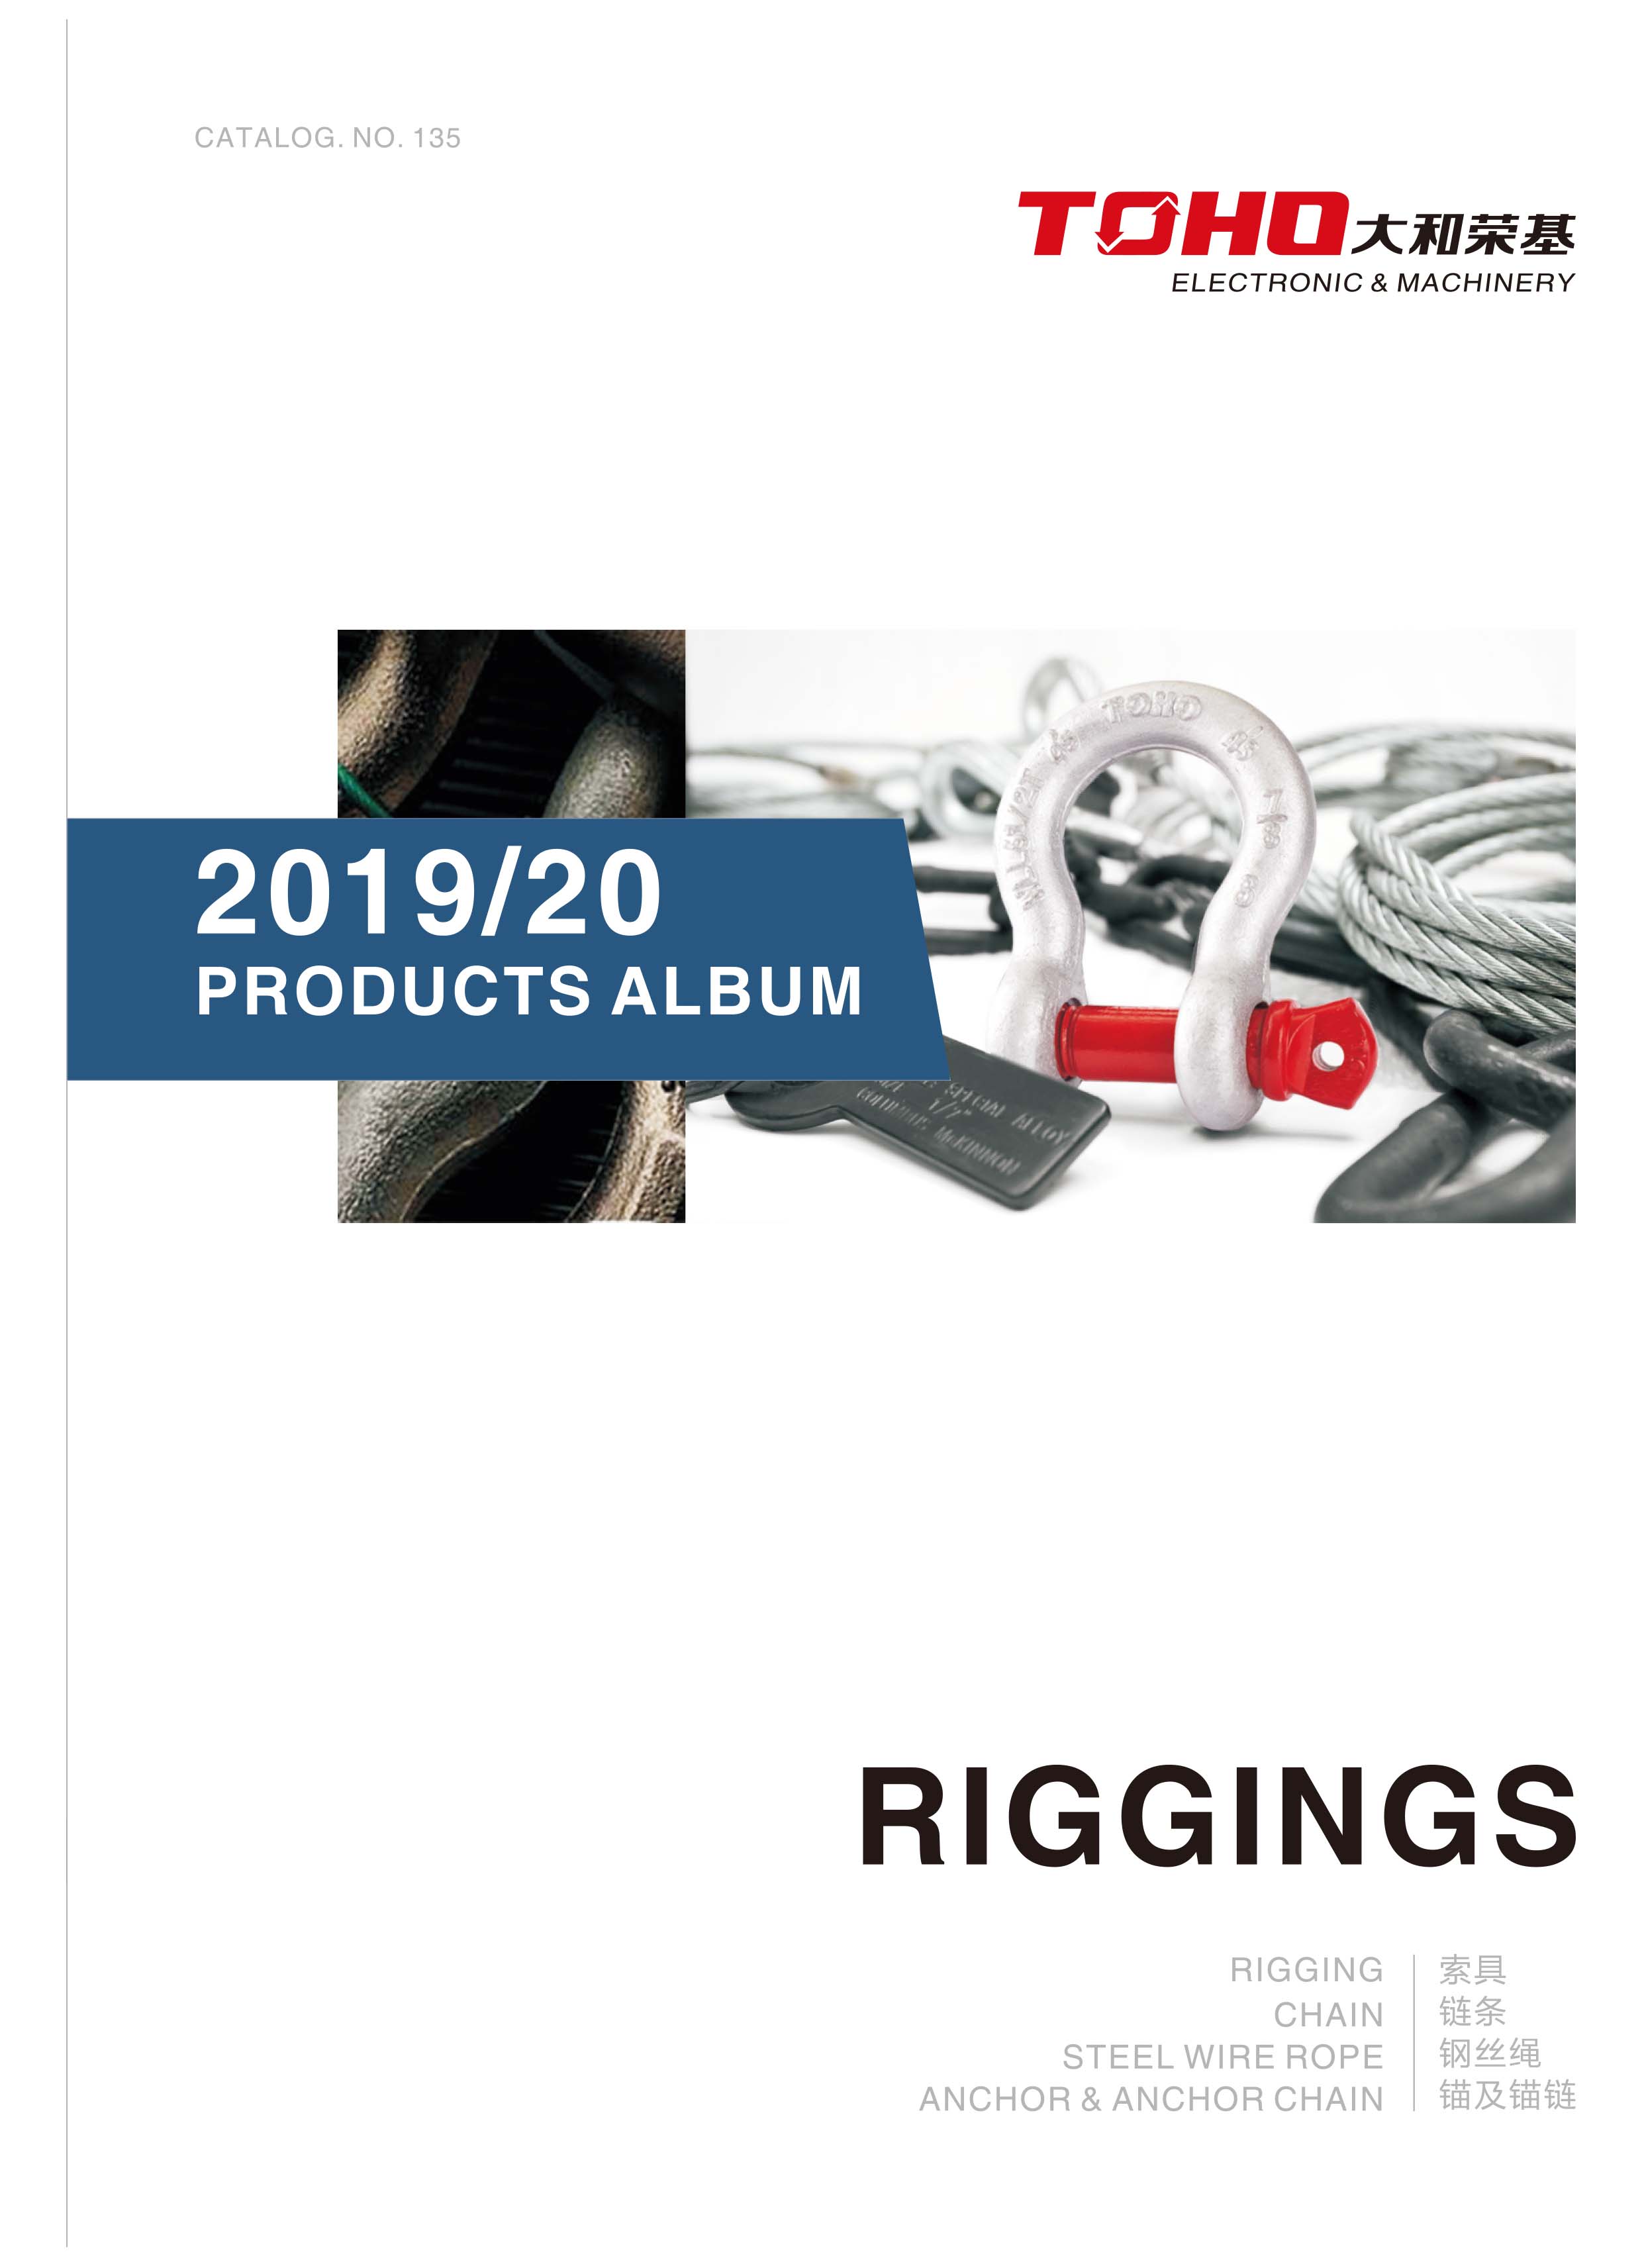 Rigging Hardware and Stainless steel rigging hardware